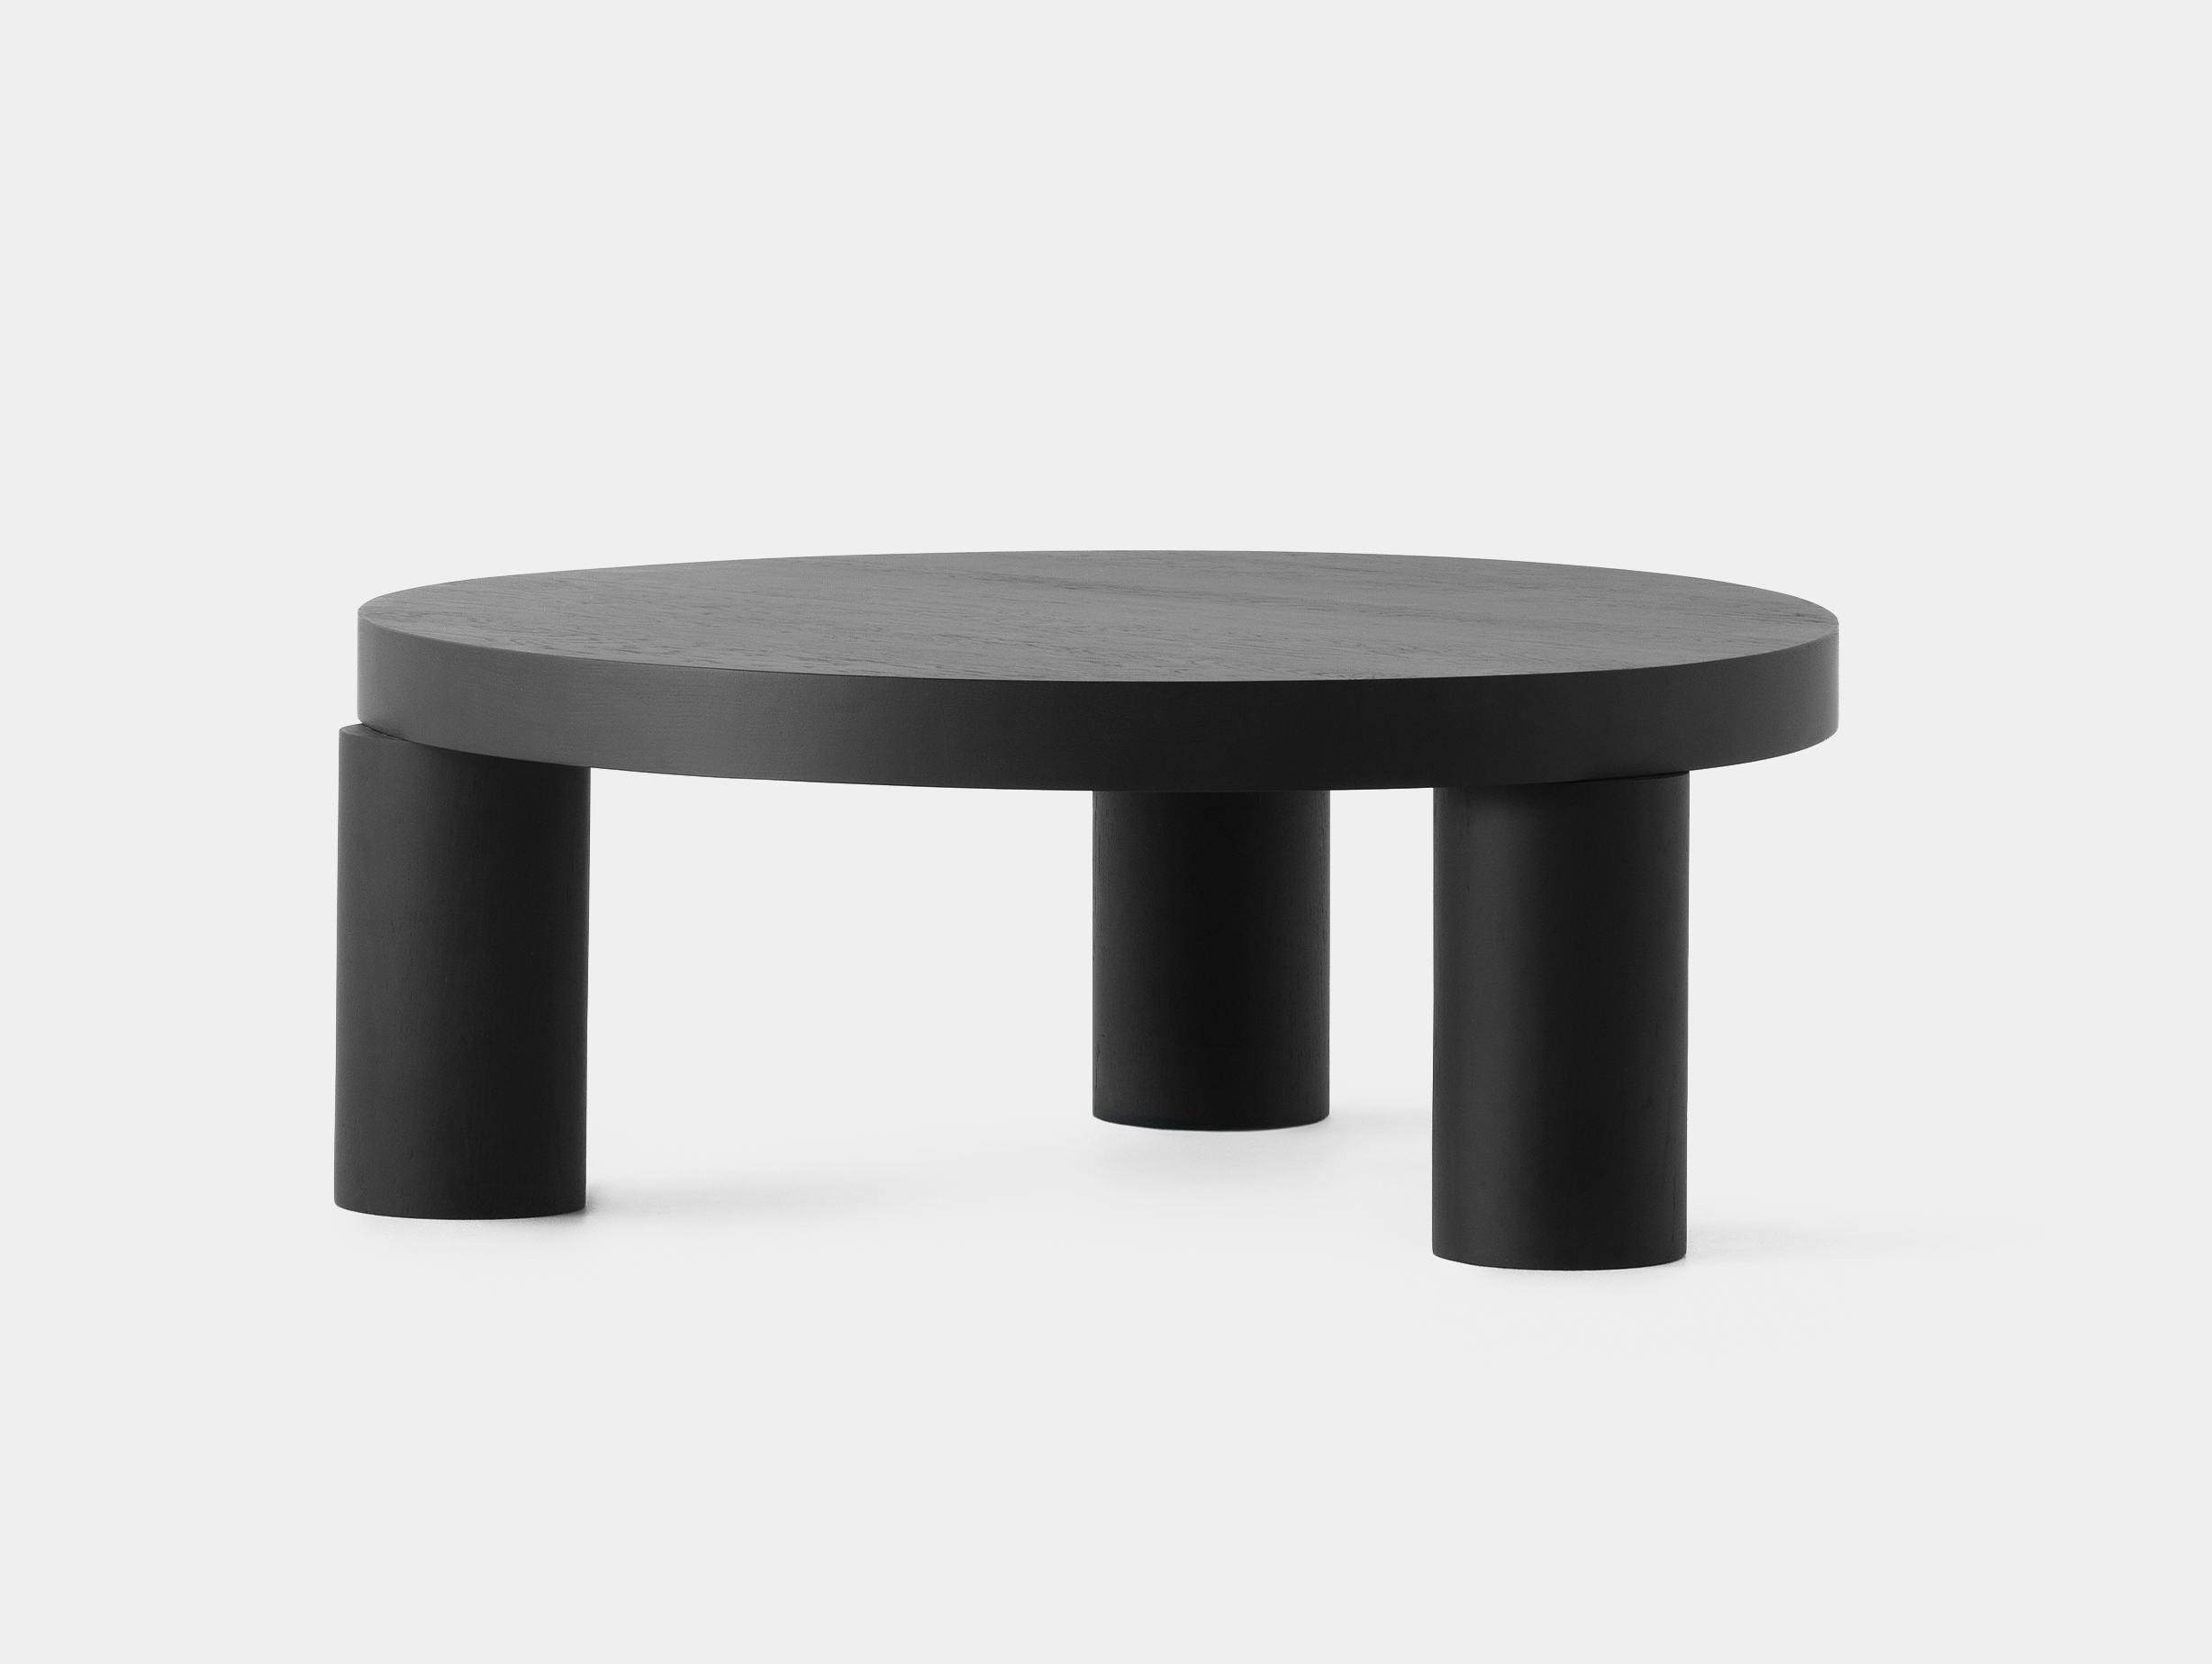 Resident offset coffee table blk